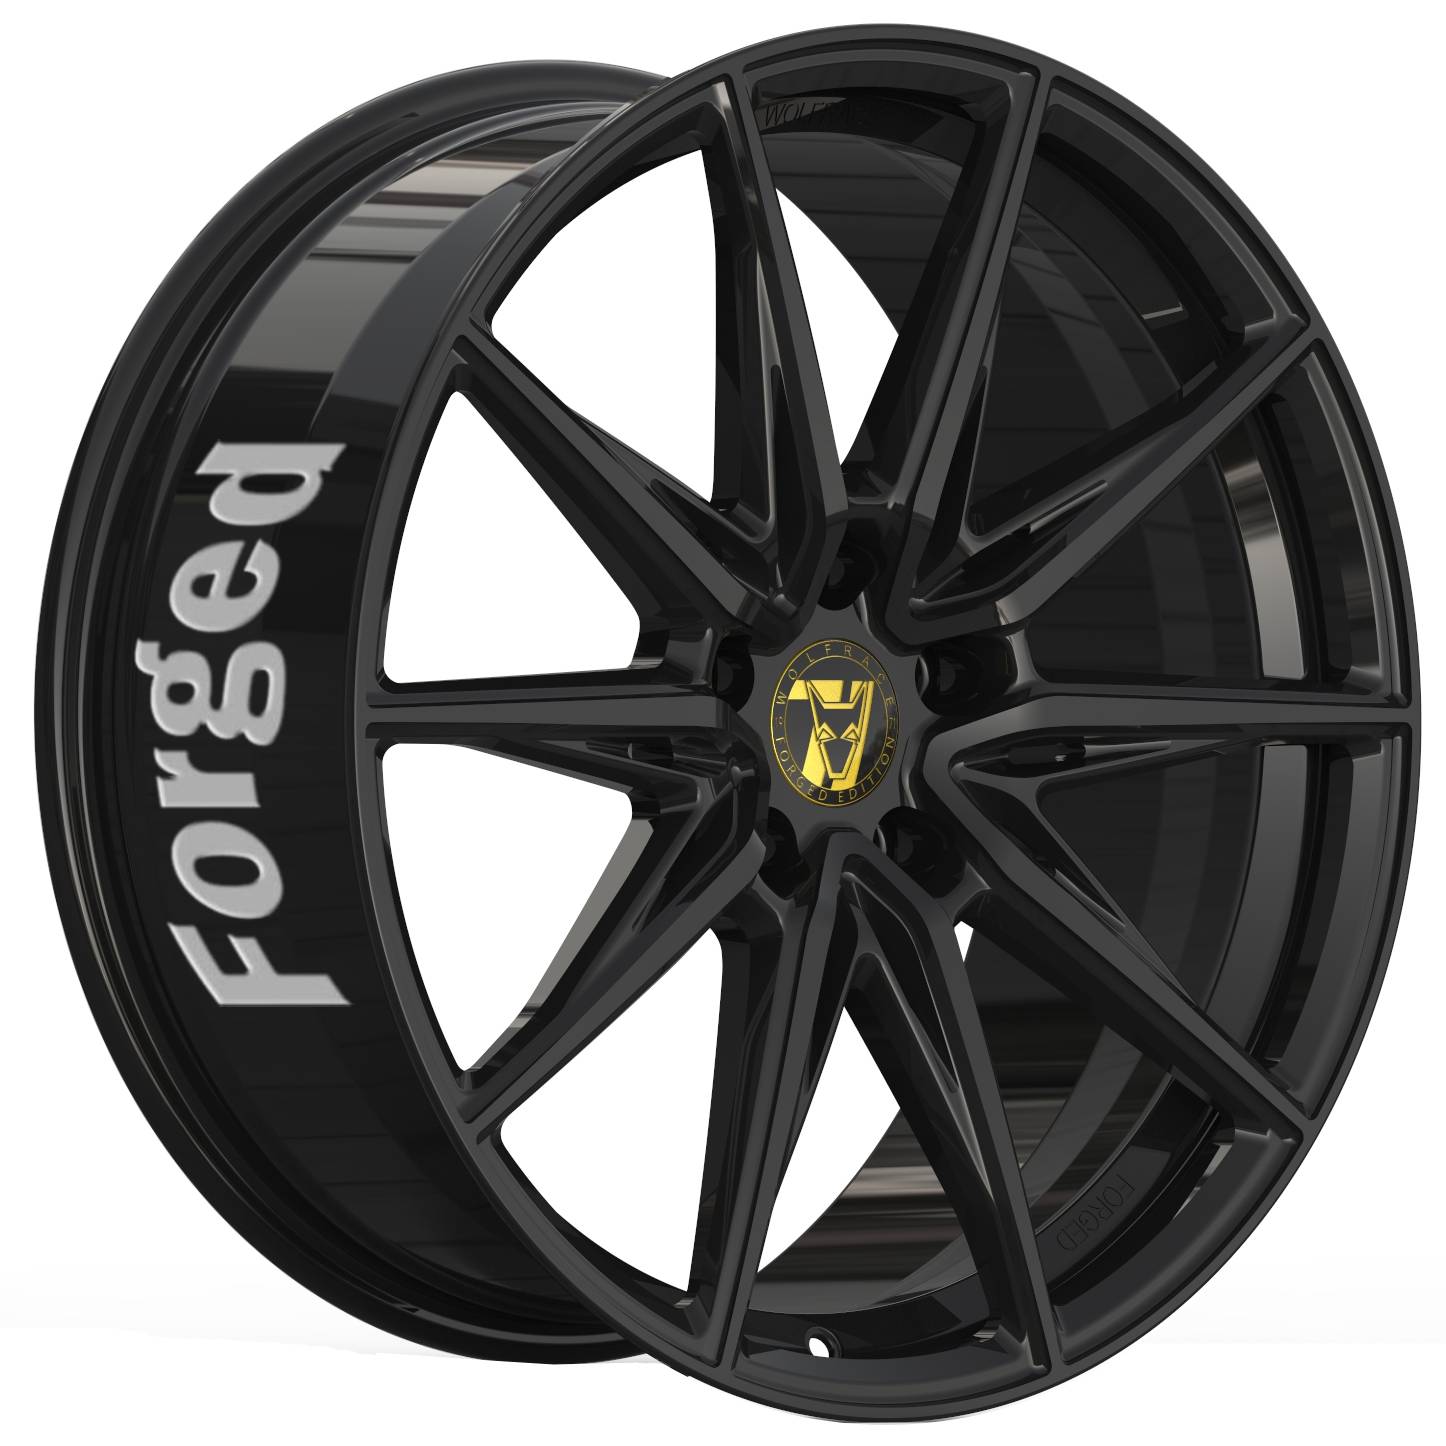 Demon Wheels 71 Forged Edition Urban Racer Forged [11x23] -5x114.3- ET 30